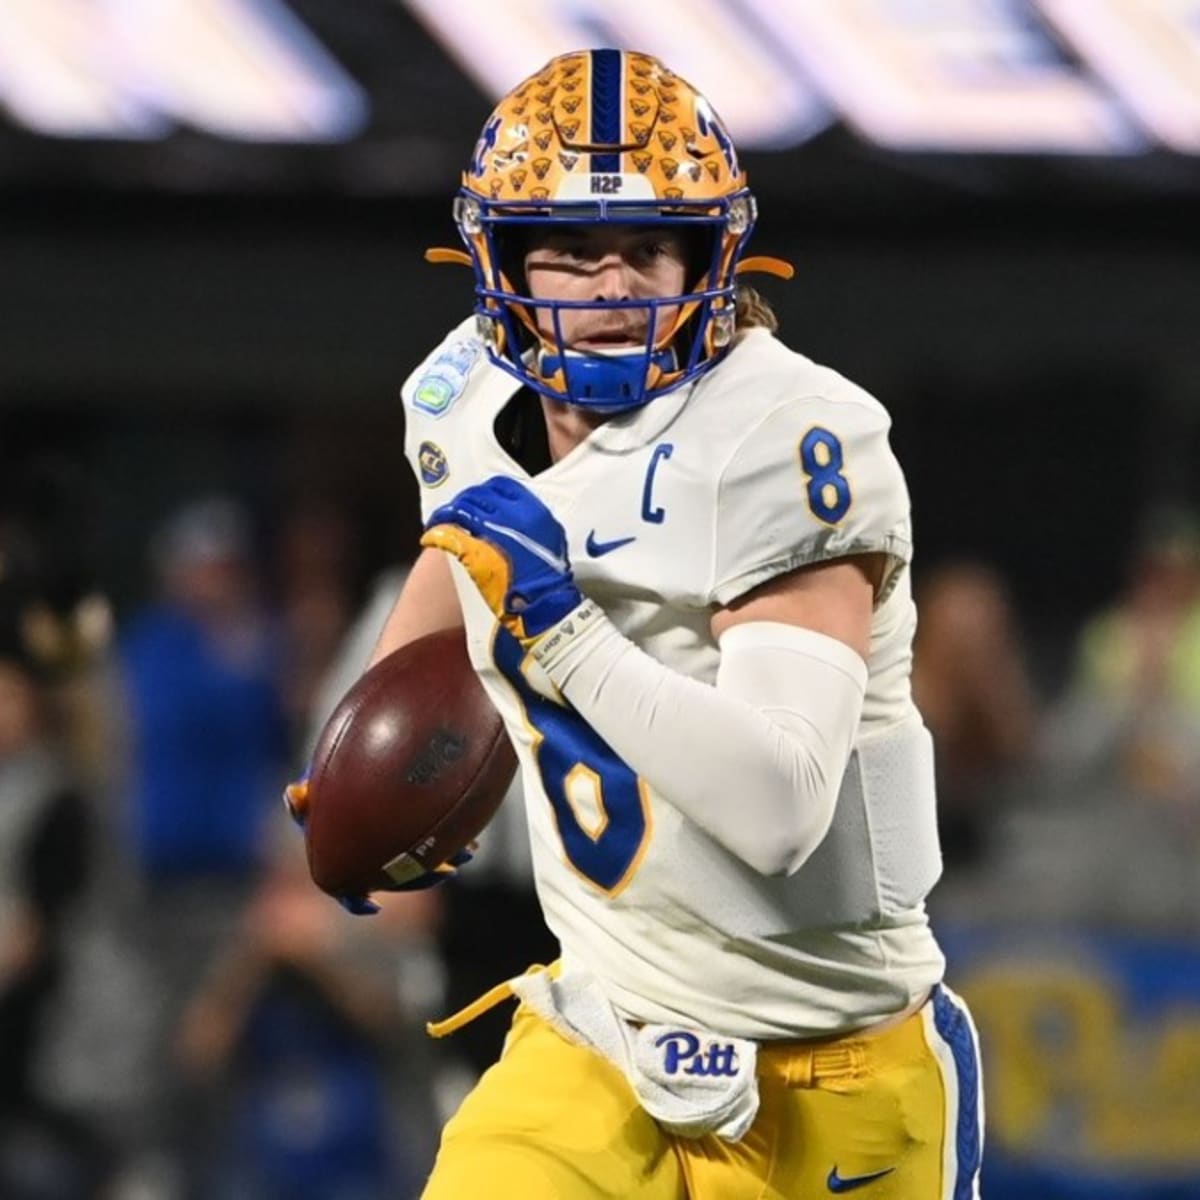 2023 NFL Mock Draft: First-round projections - The San Diego Union-Tribune